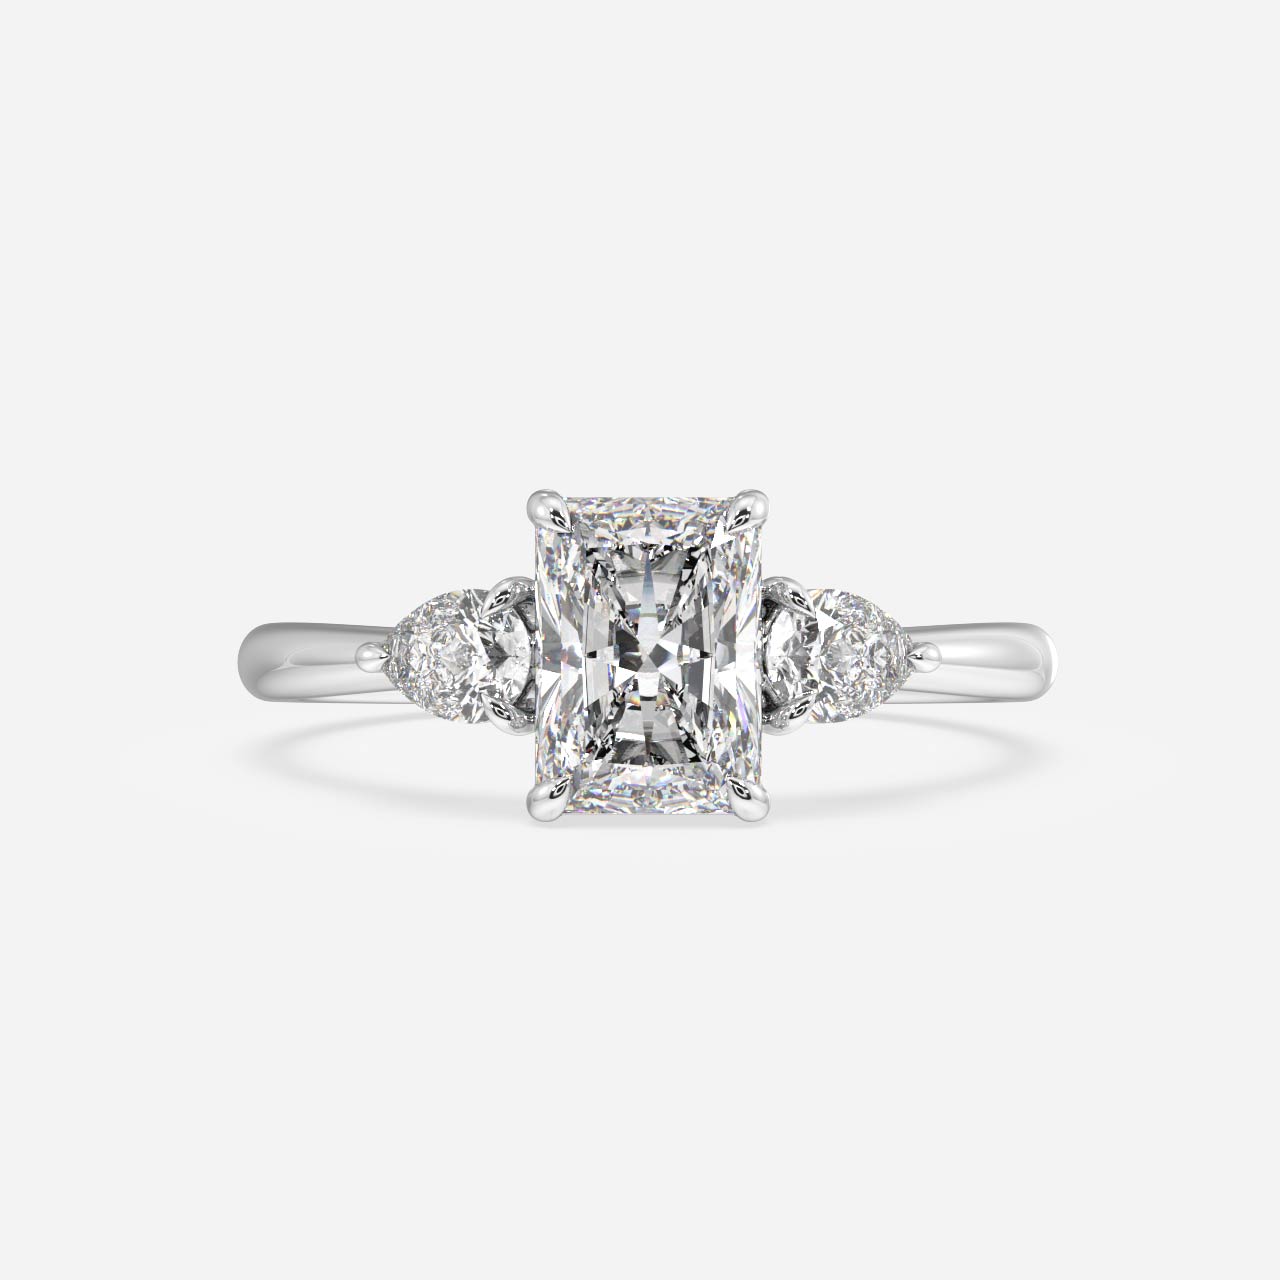 10 Engagement Ring Cuts and Their Unique Meaning | Vogue